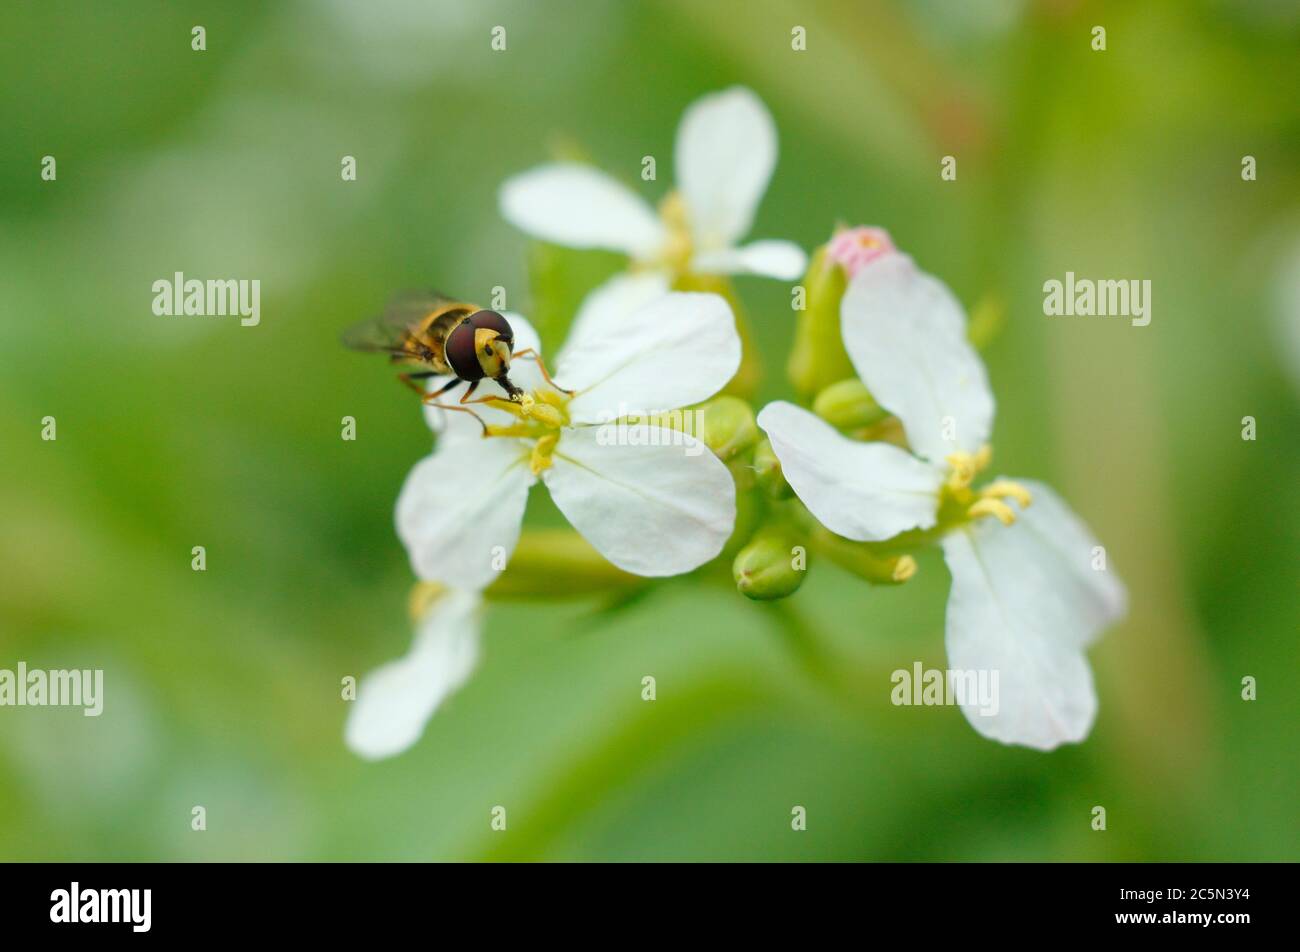 Hoverfly feeding on the flower pollen of a bolted radish plant in an English garden.  Syrphus ribesi on Raphanus sativus. Stock Photo